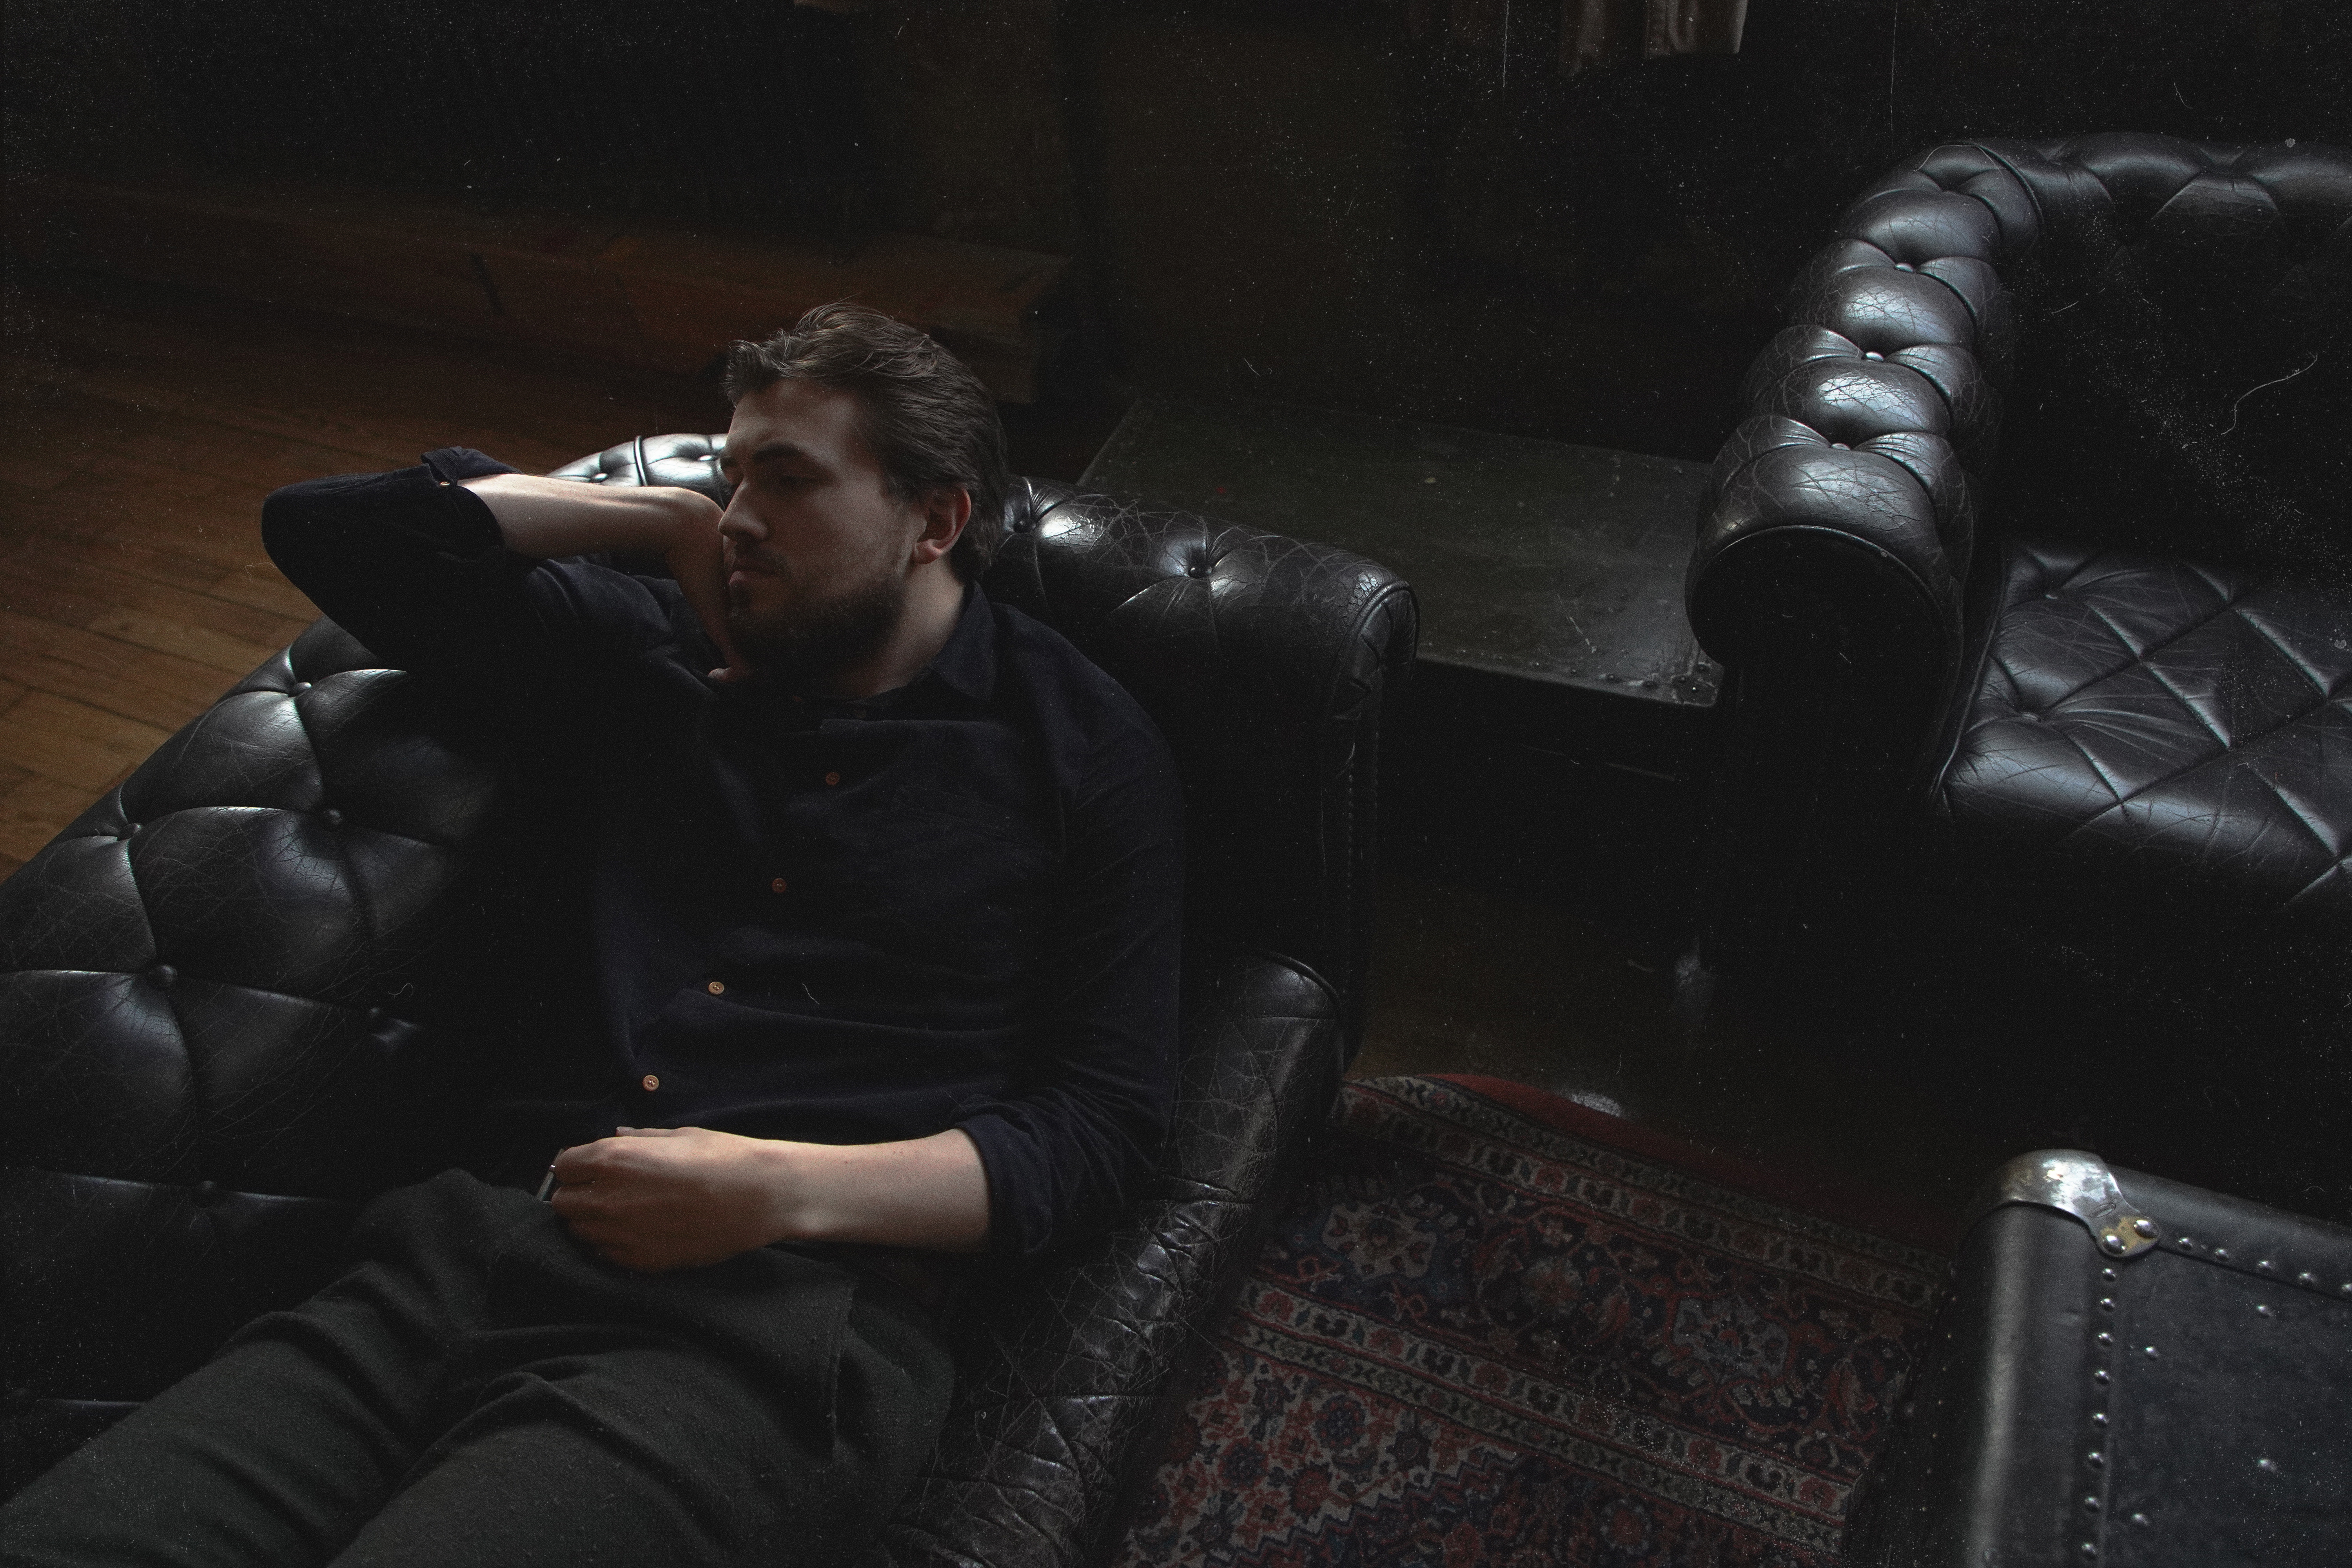 Icelandic artist Axel Flovent lying in a sofa